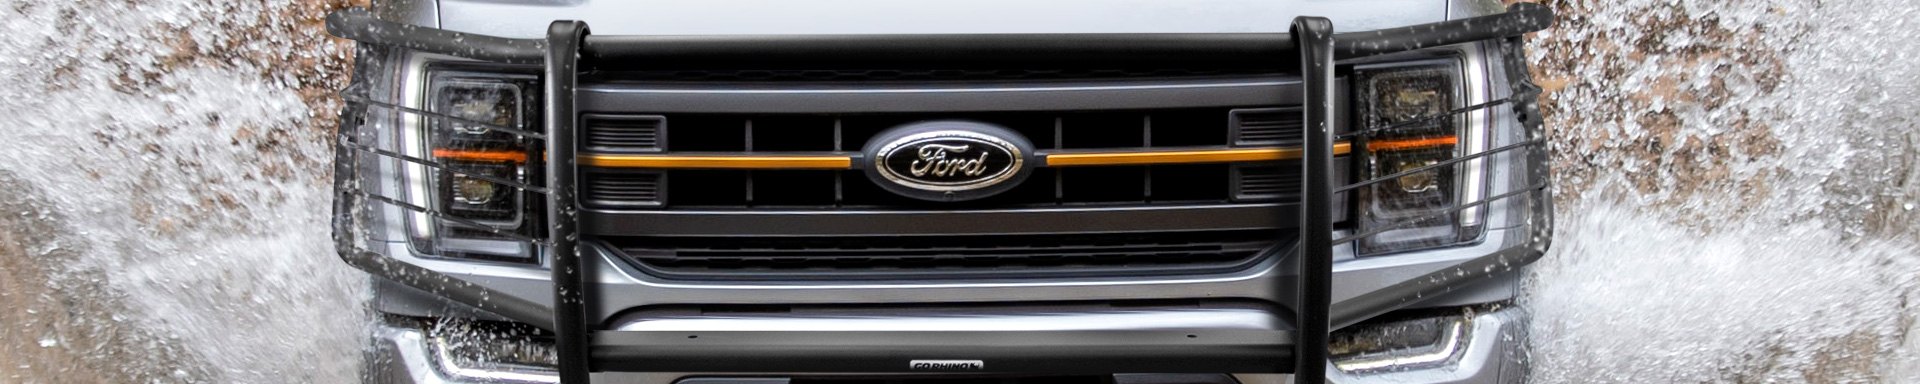 Maximize Front-End Protection Of Your 2021 F-150 With 3100 Series Grille Guard